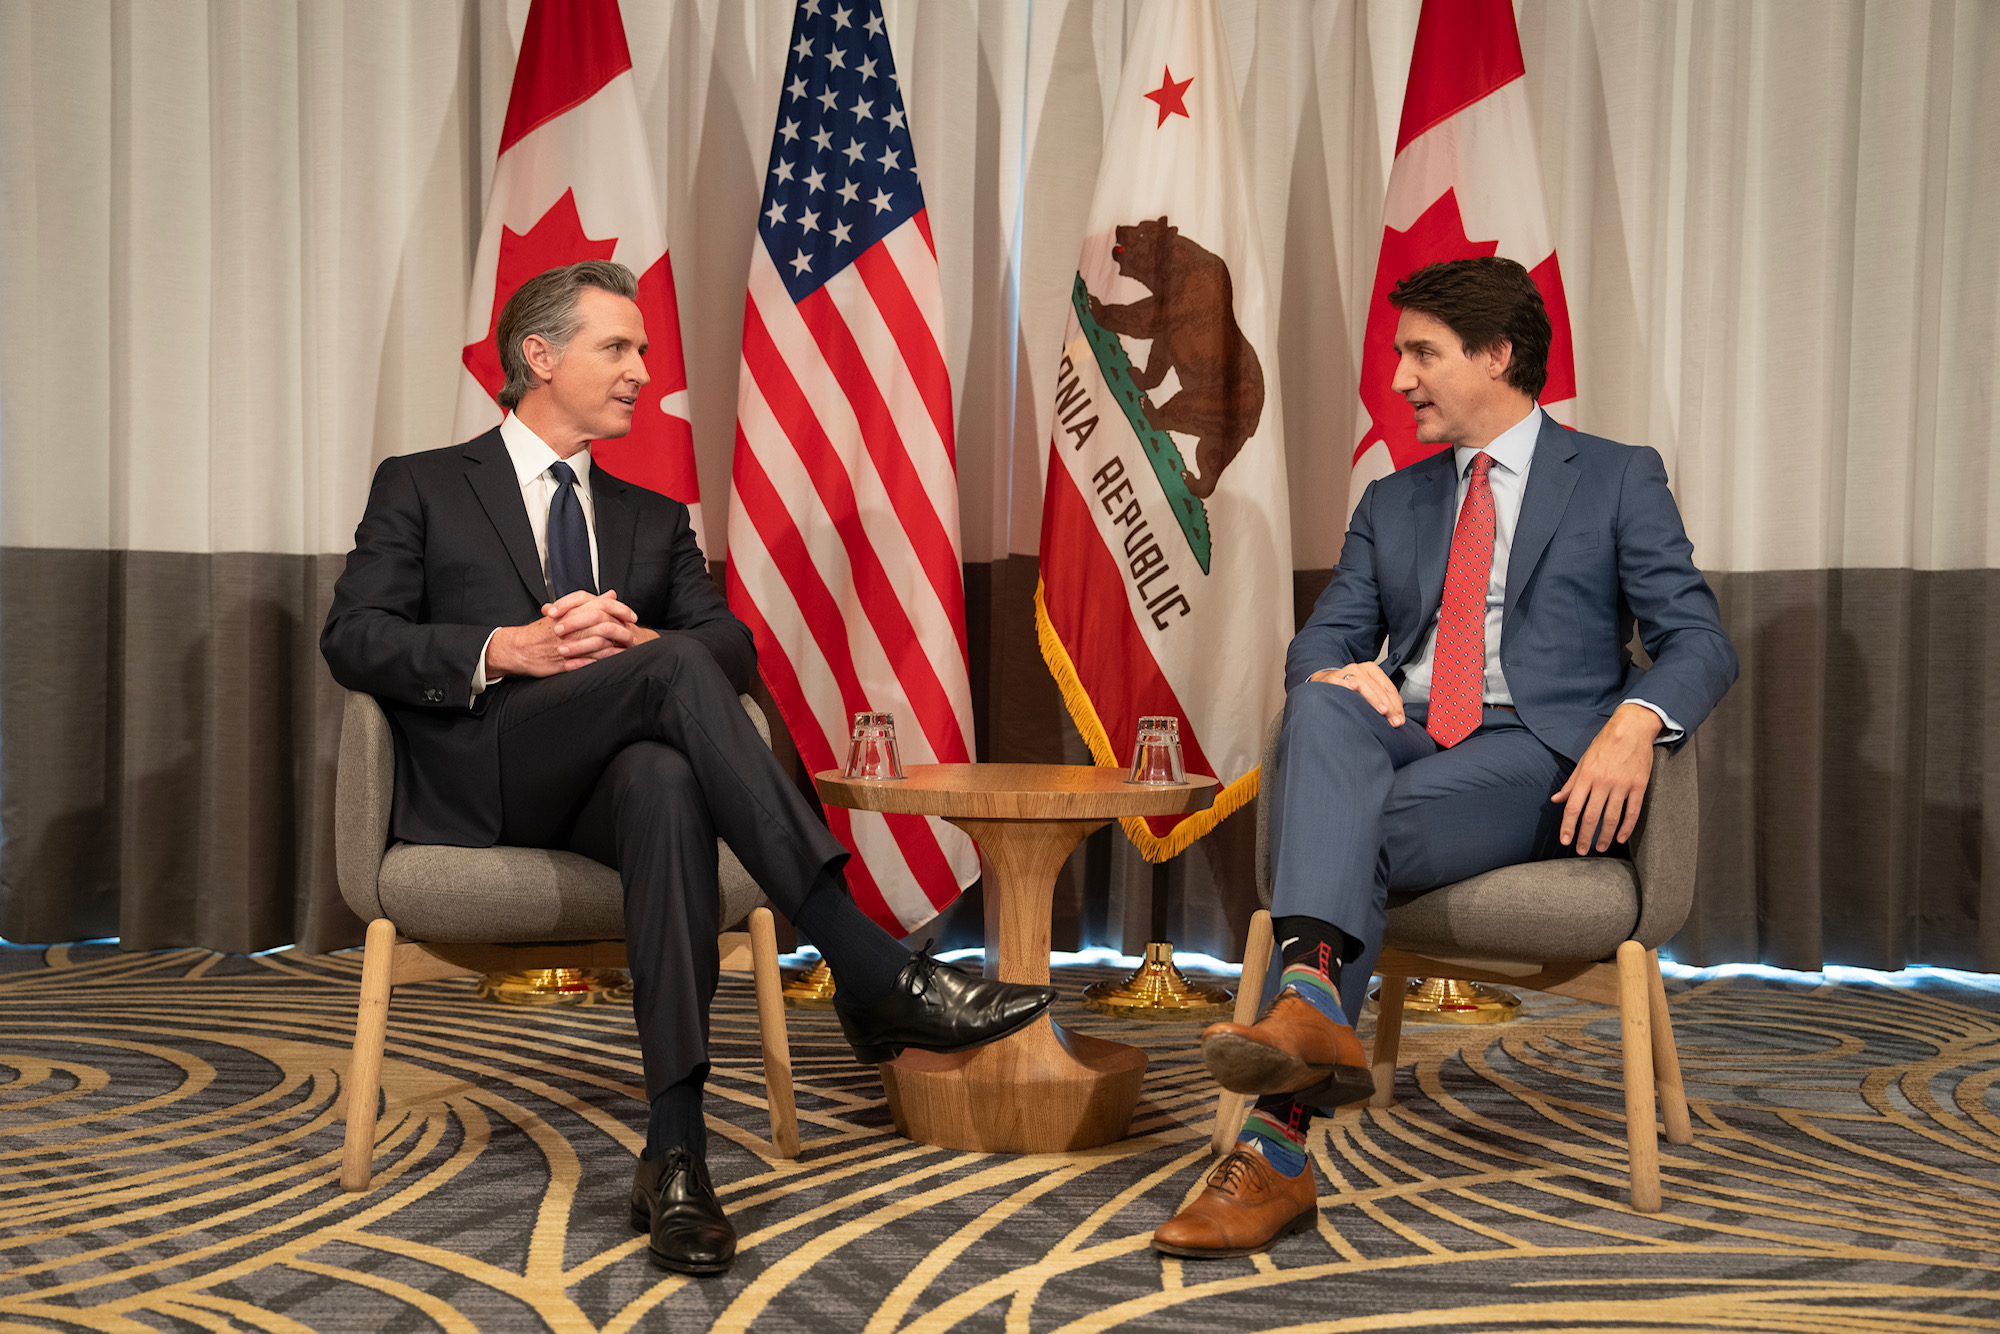 At Apec, Governor Newsom Promotes California'S Low-Carbon, Green Growth Economy